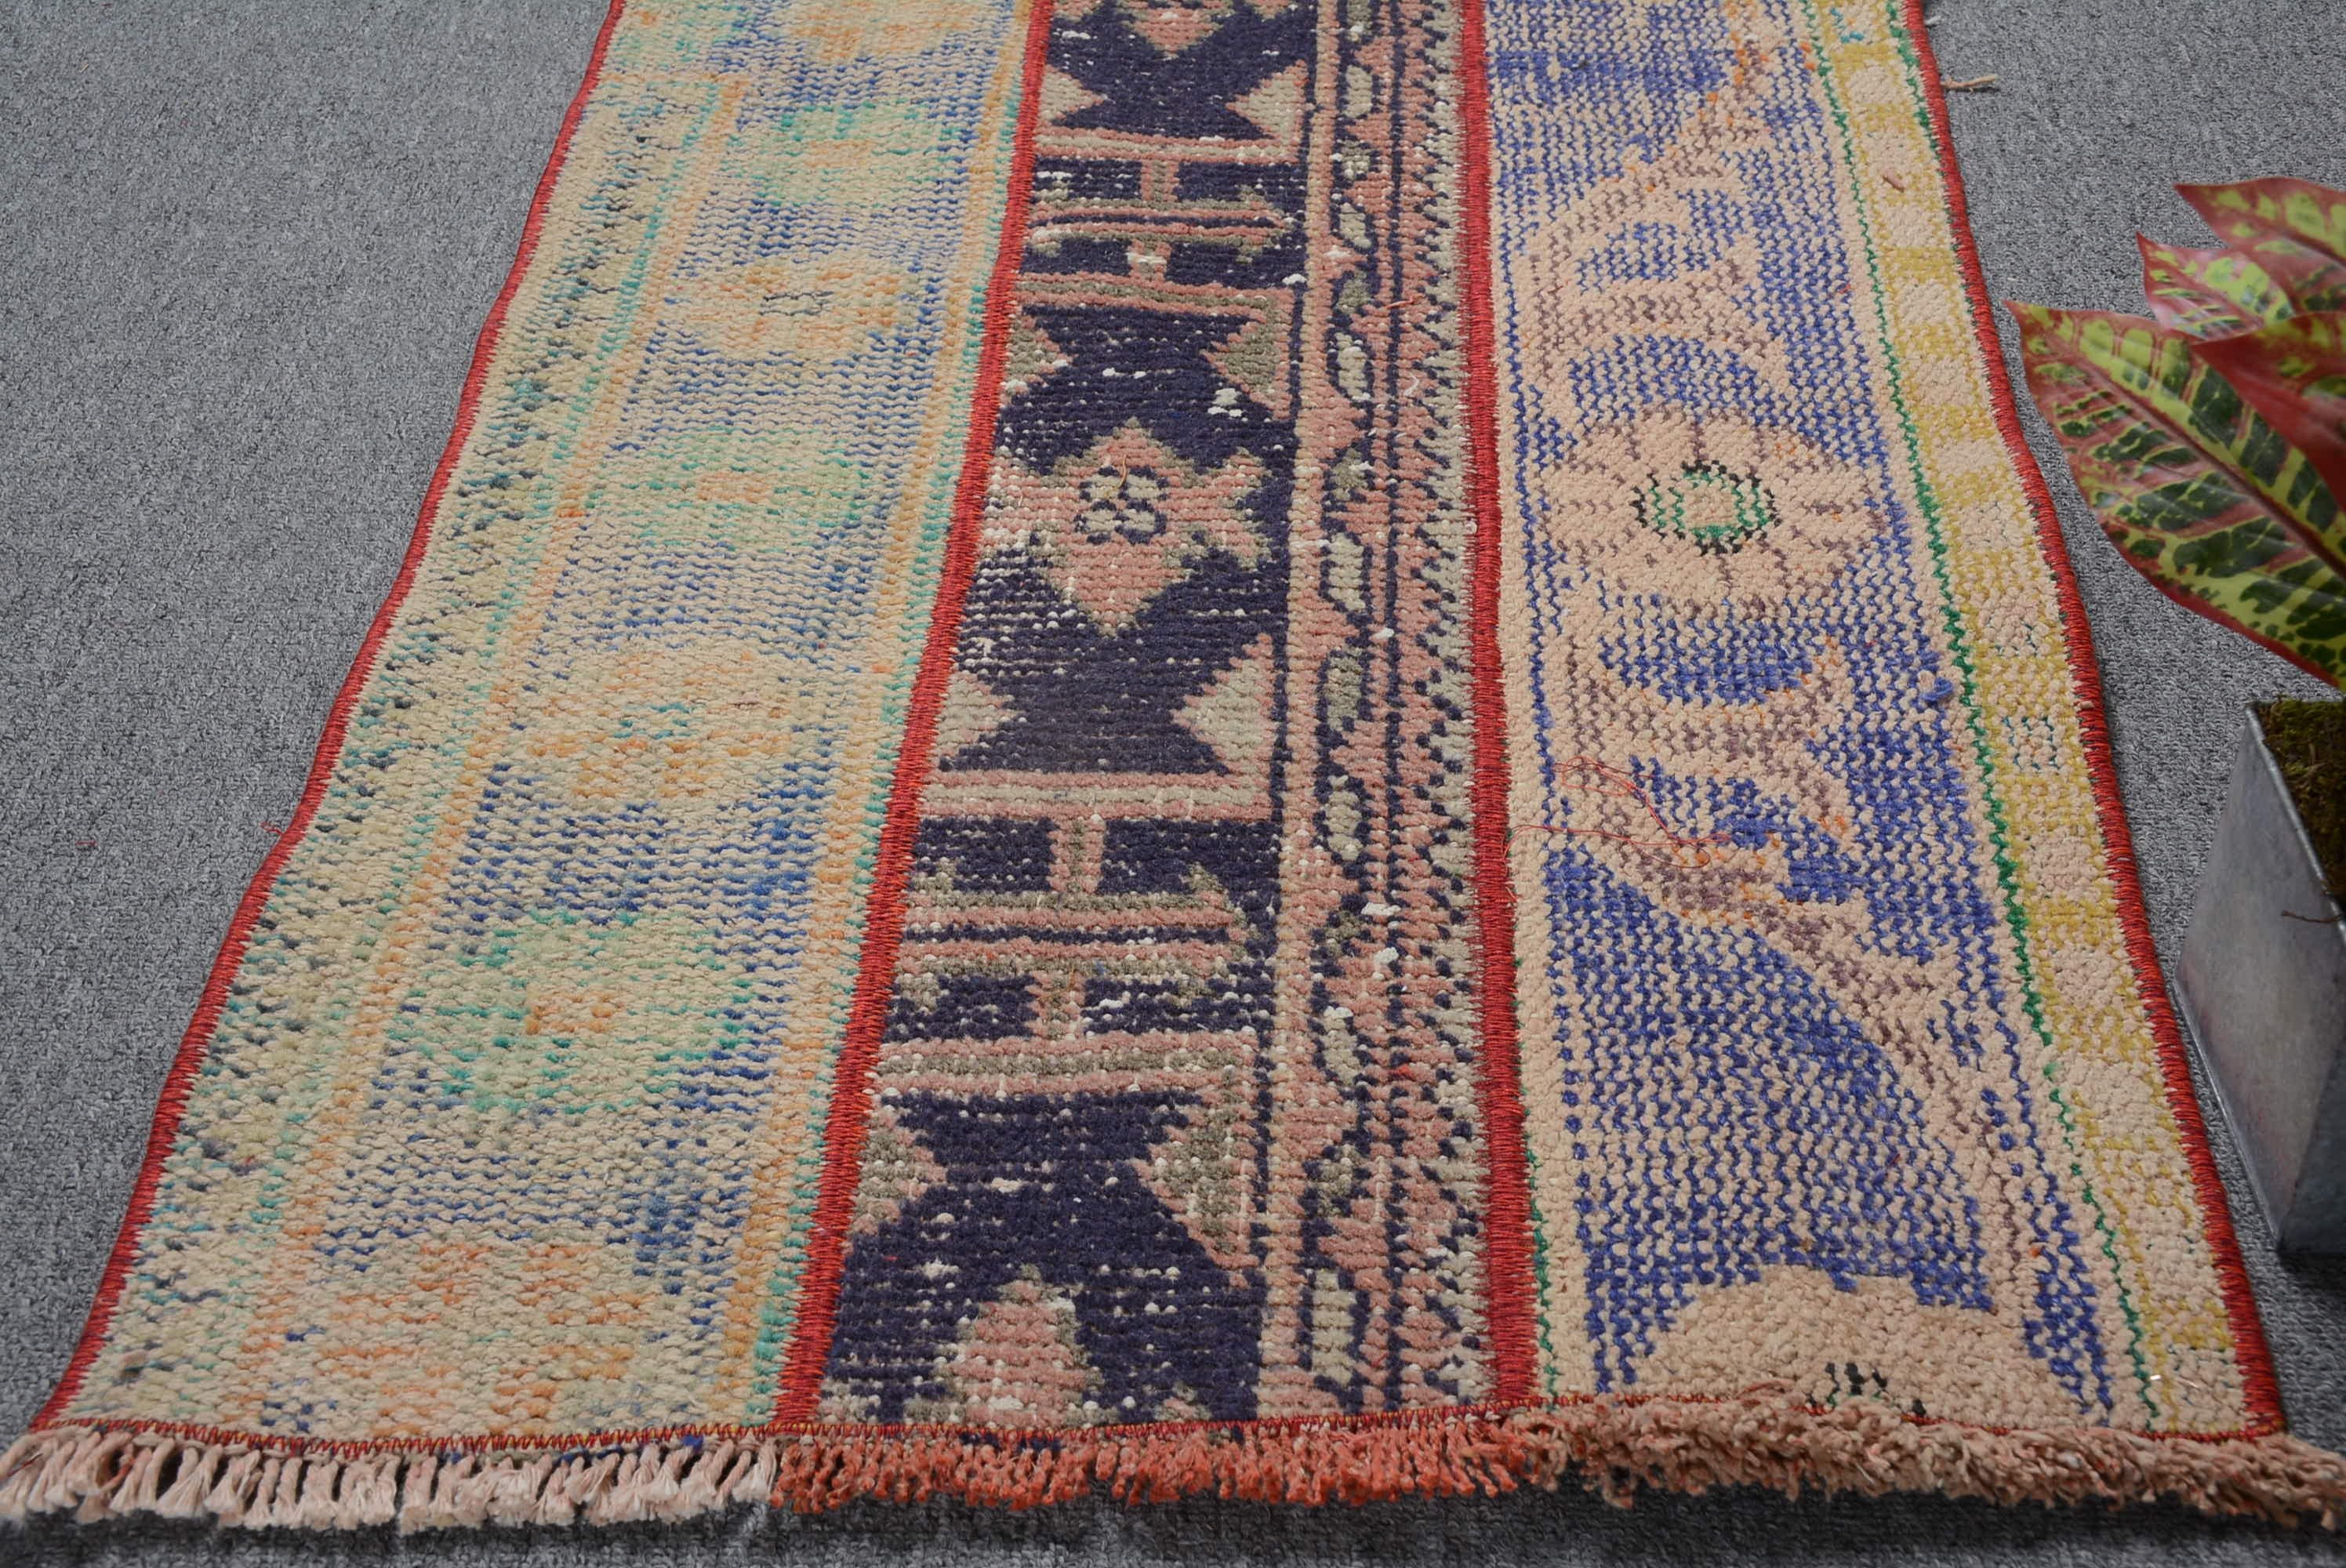 Pale Rug, Kitchen Rug, Bedroom Rugs, Turkish Rug, 1.8x2.6 ft Small Rugs, Blue Cool Rug, Vintage Rugs, Home Decor Rugs